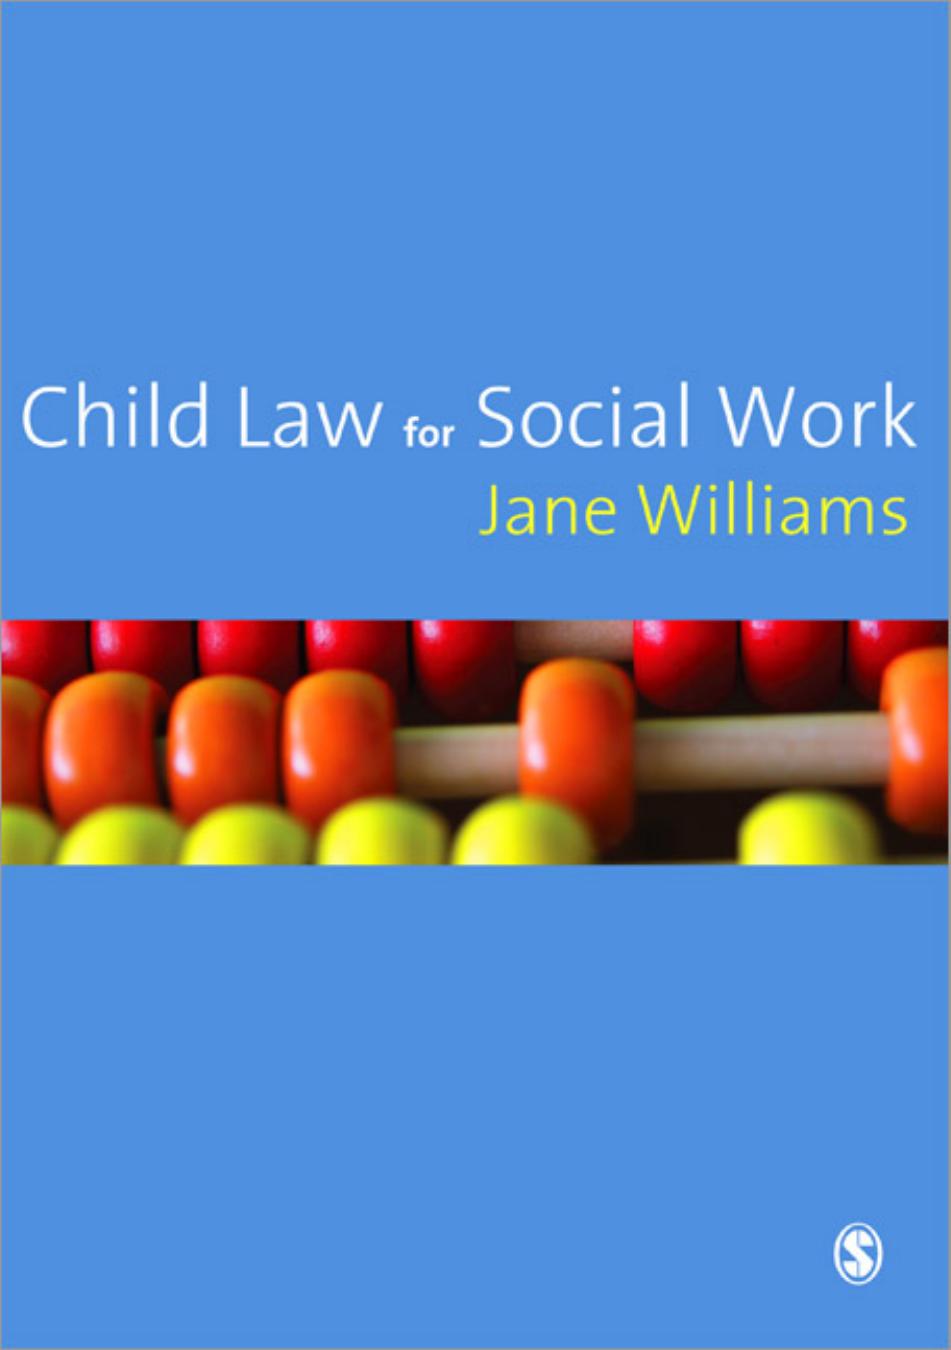 4 Child law for social work   implementing rights through policy and practice 2008